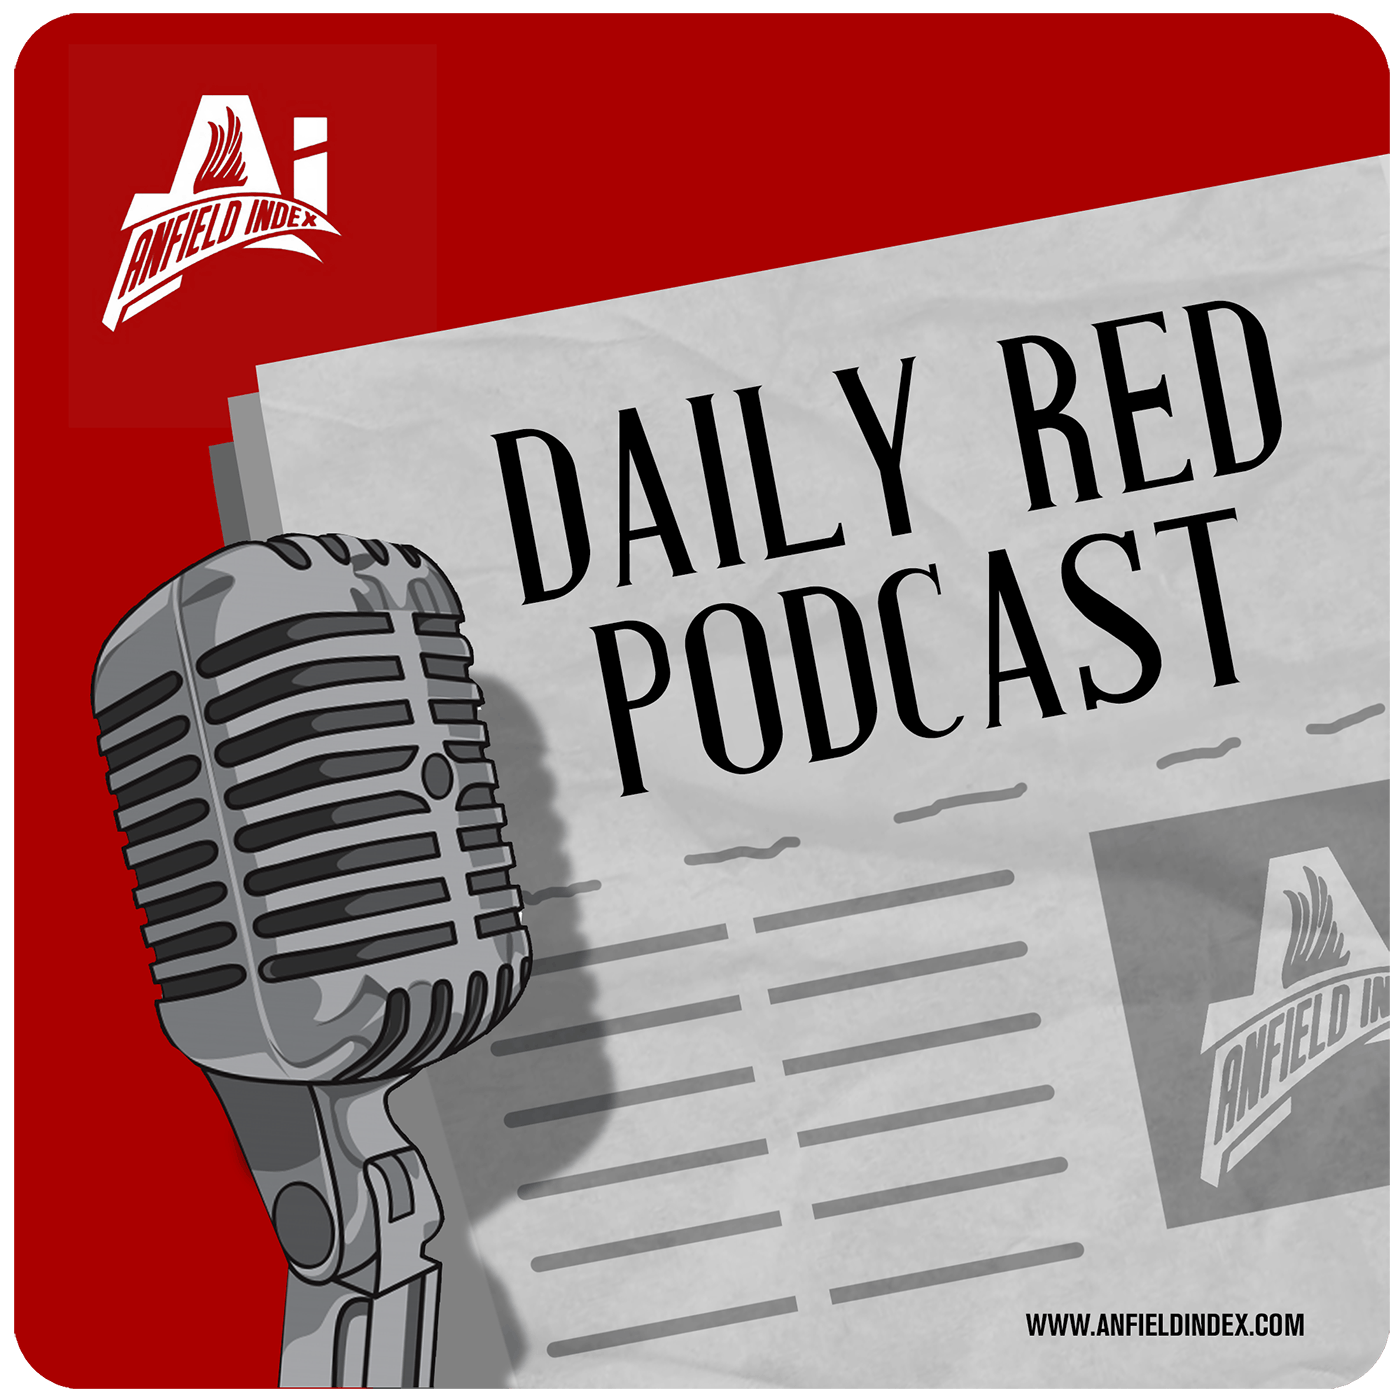 Premier League Players: Daily Red Podcast